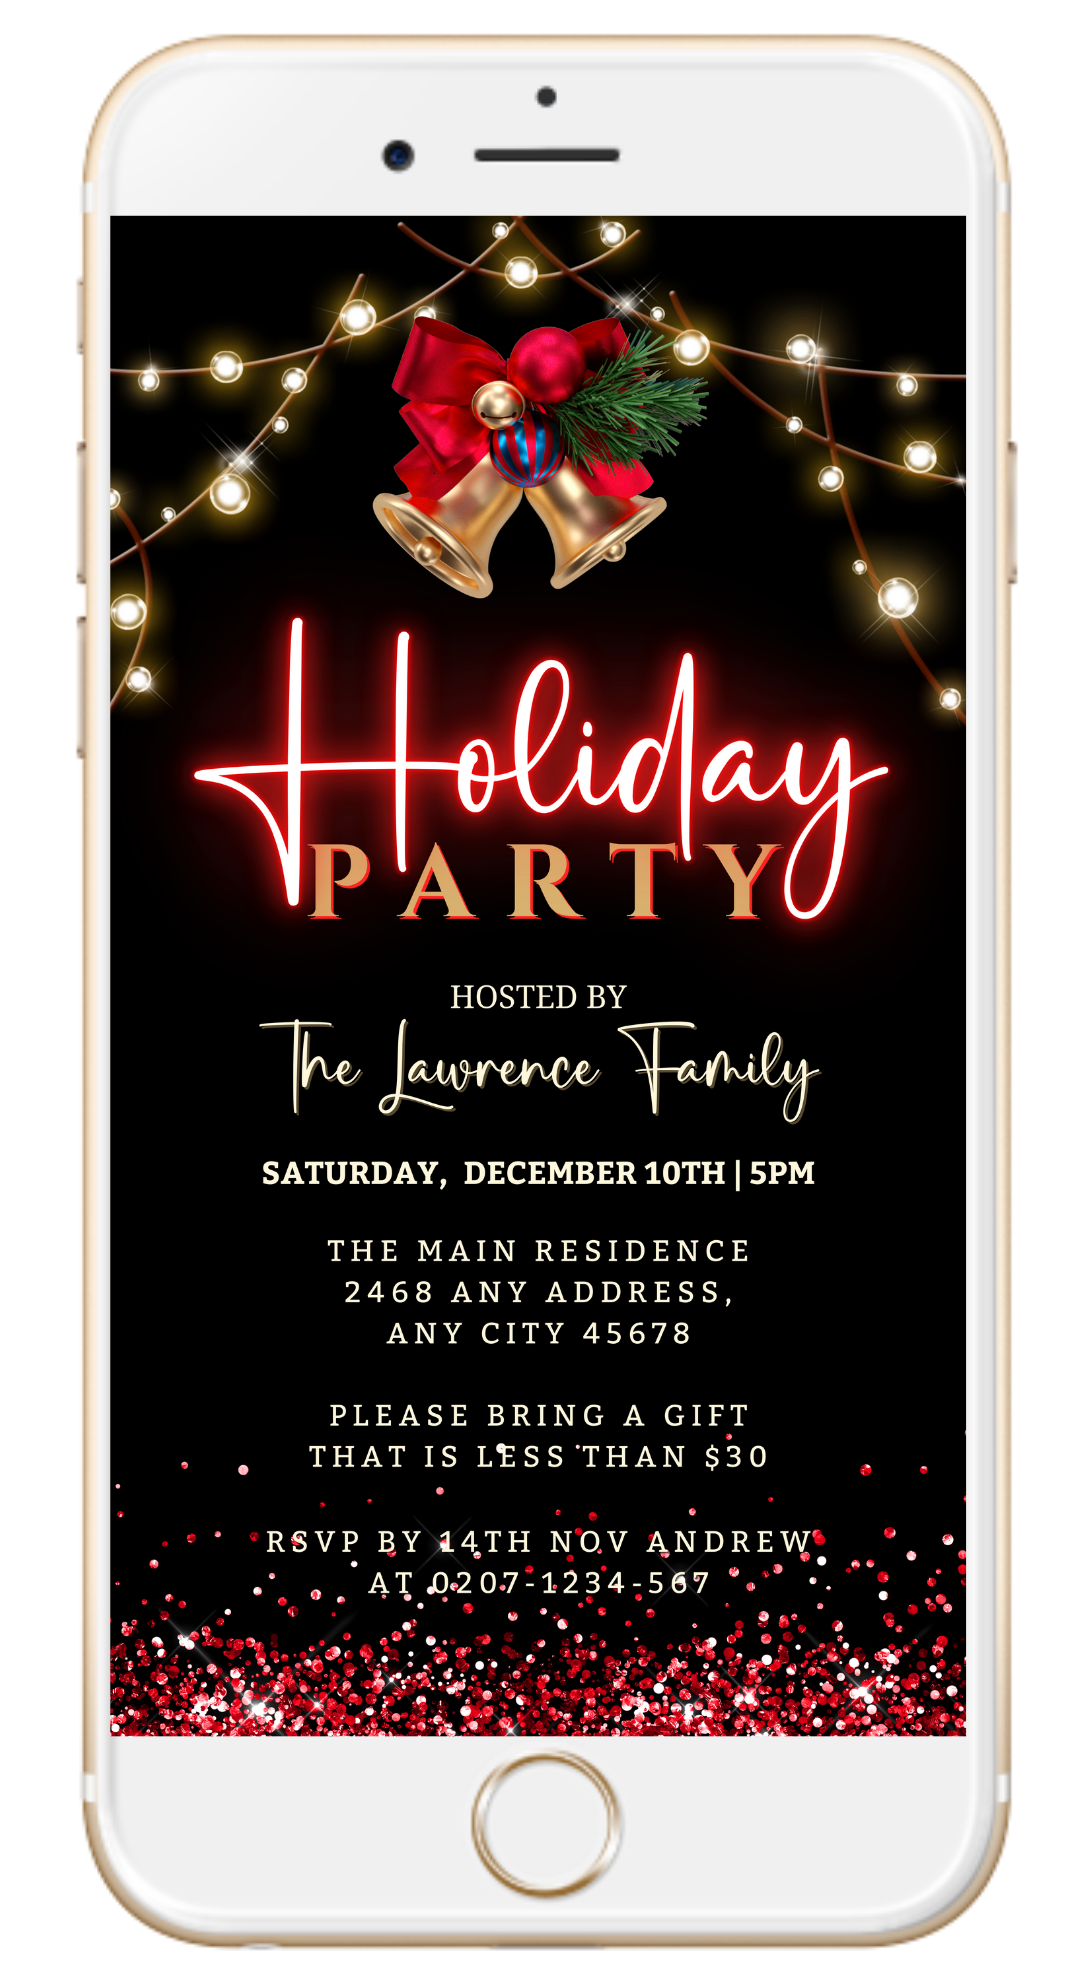 Gold Bell Red Neon Holiday Party Evite on a black background, featuring editable red and gold text with festive bells and lights.